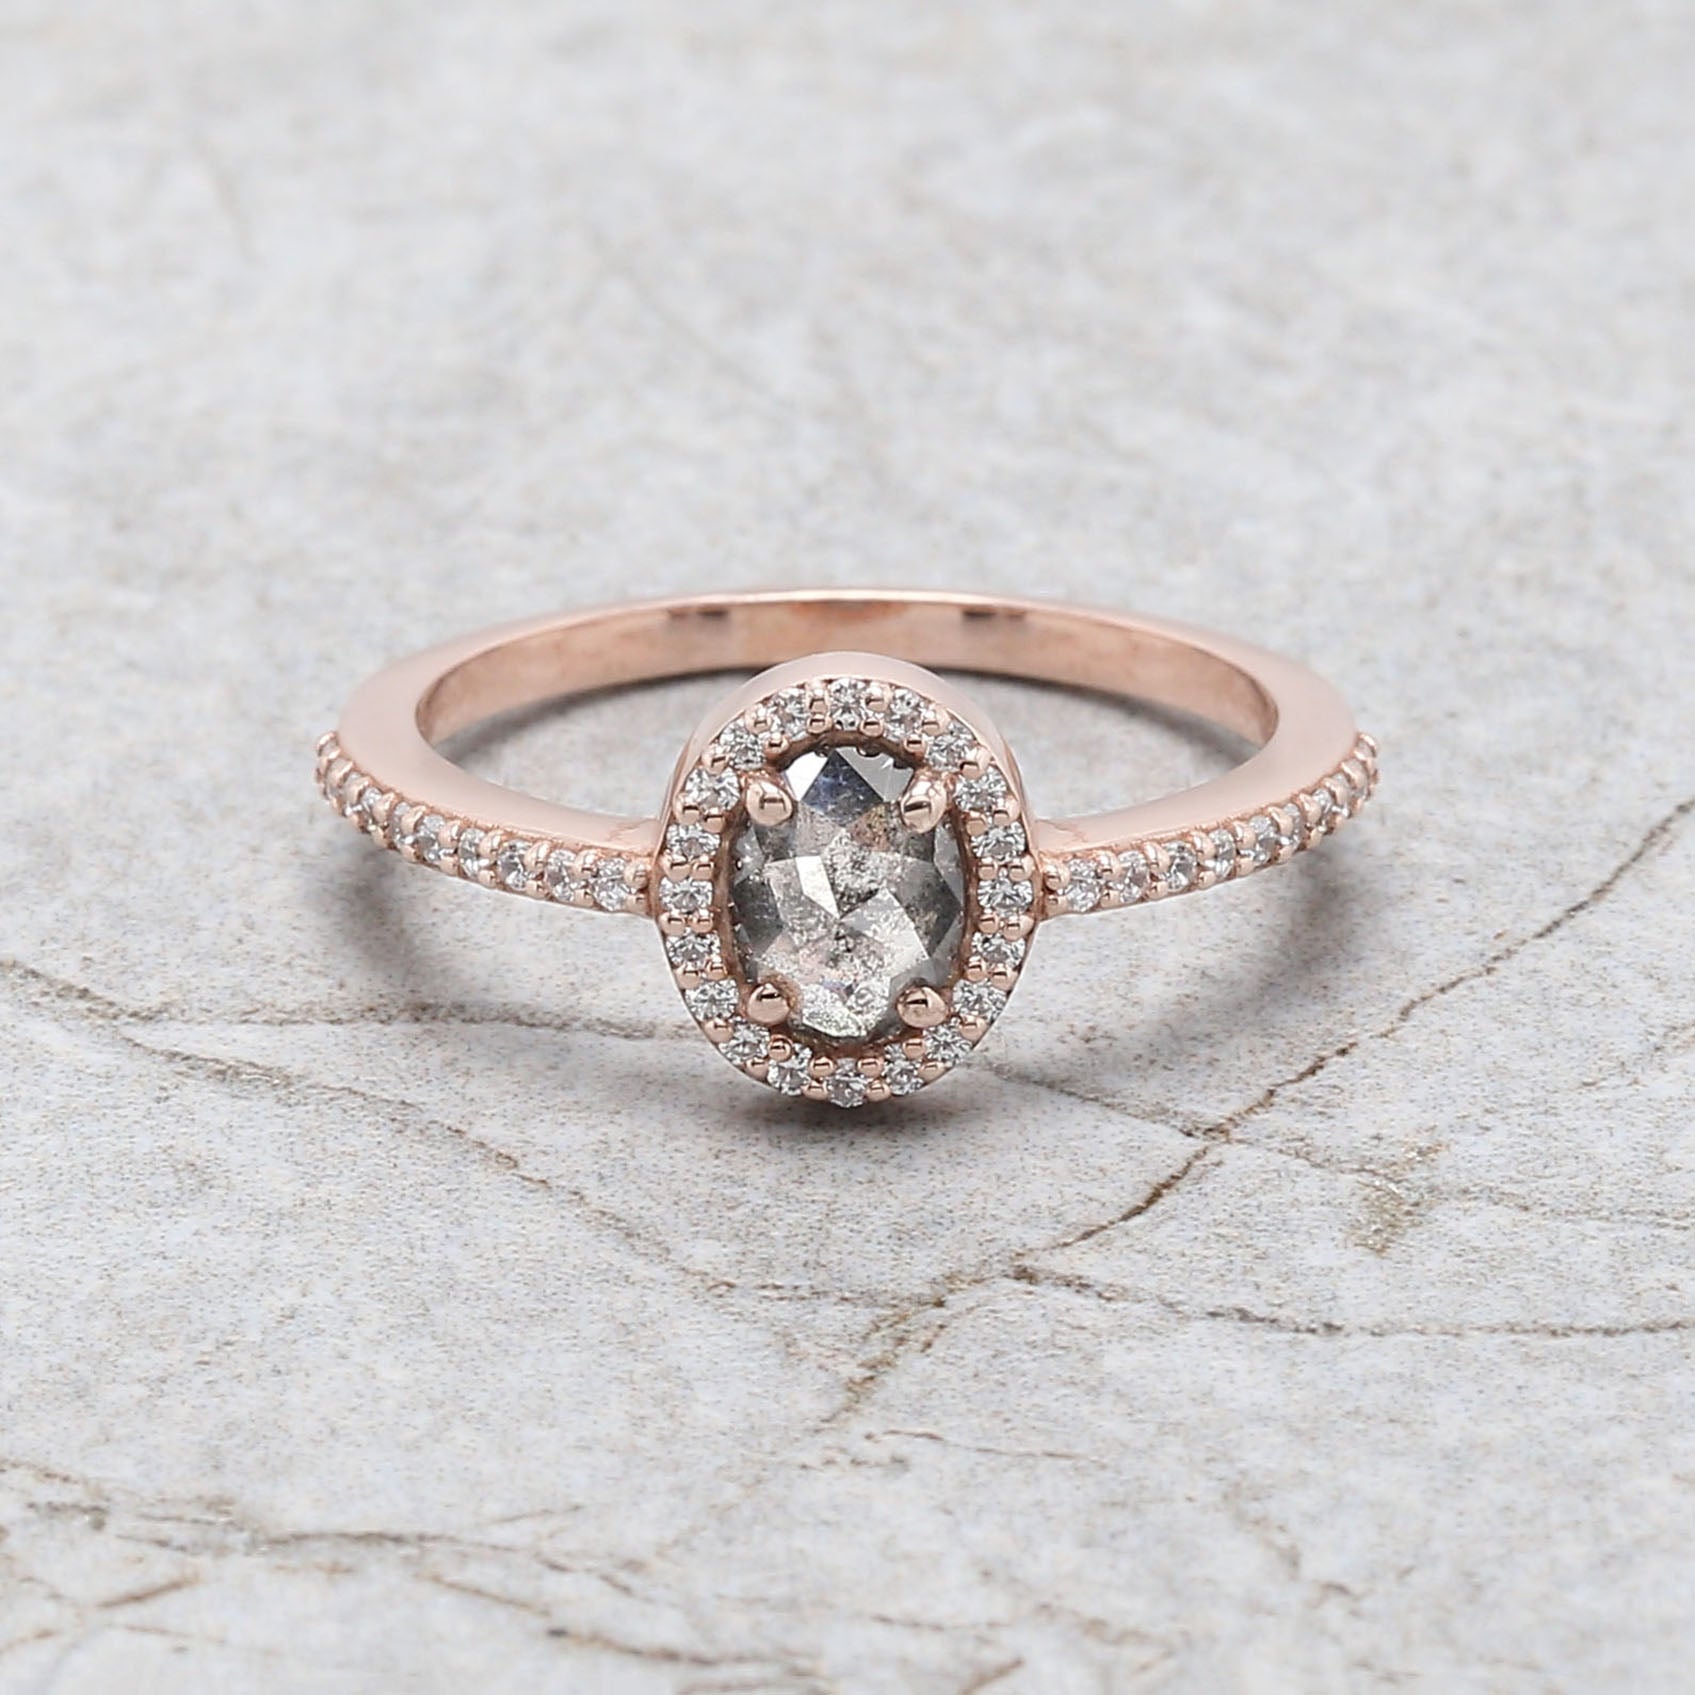 Oval Cut Salt And Pepper Diamond Ring 0.52 Ct 5.85 MM Oval Diamond Ring 14K Solid Rose Gold Silver Oval Engagement Ring Gift For Her QN1147